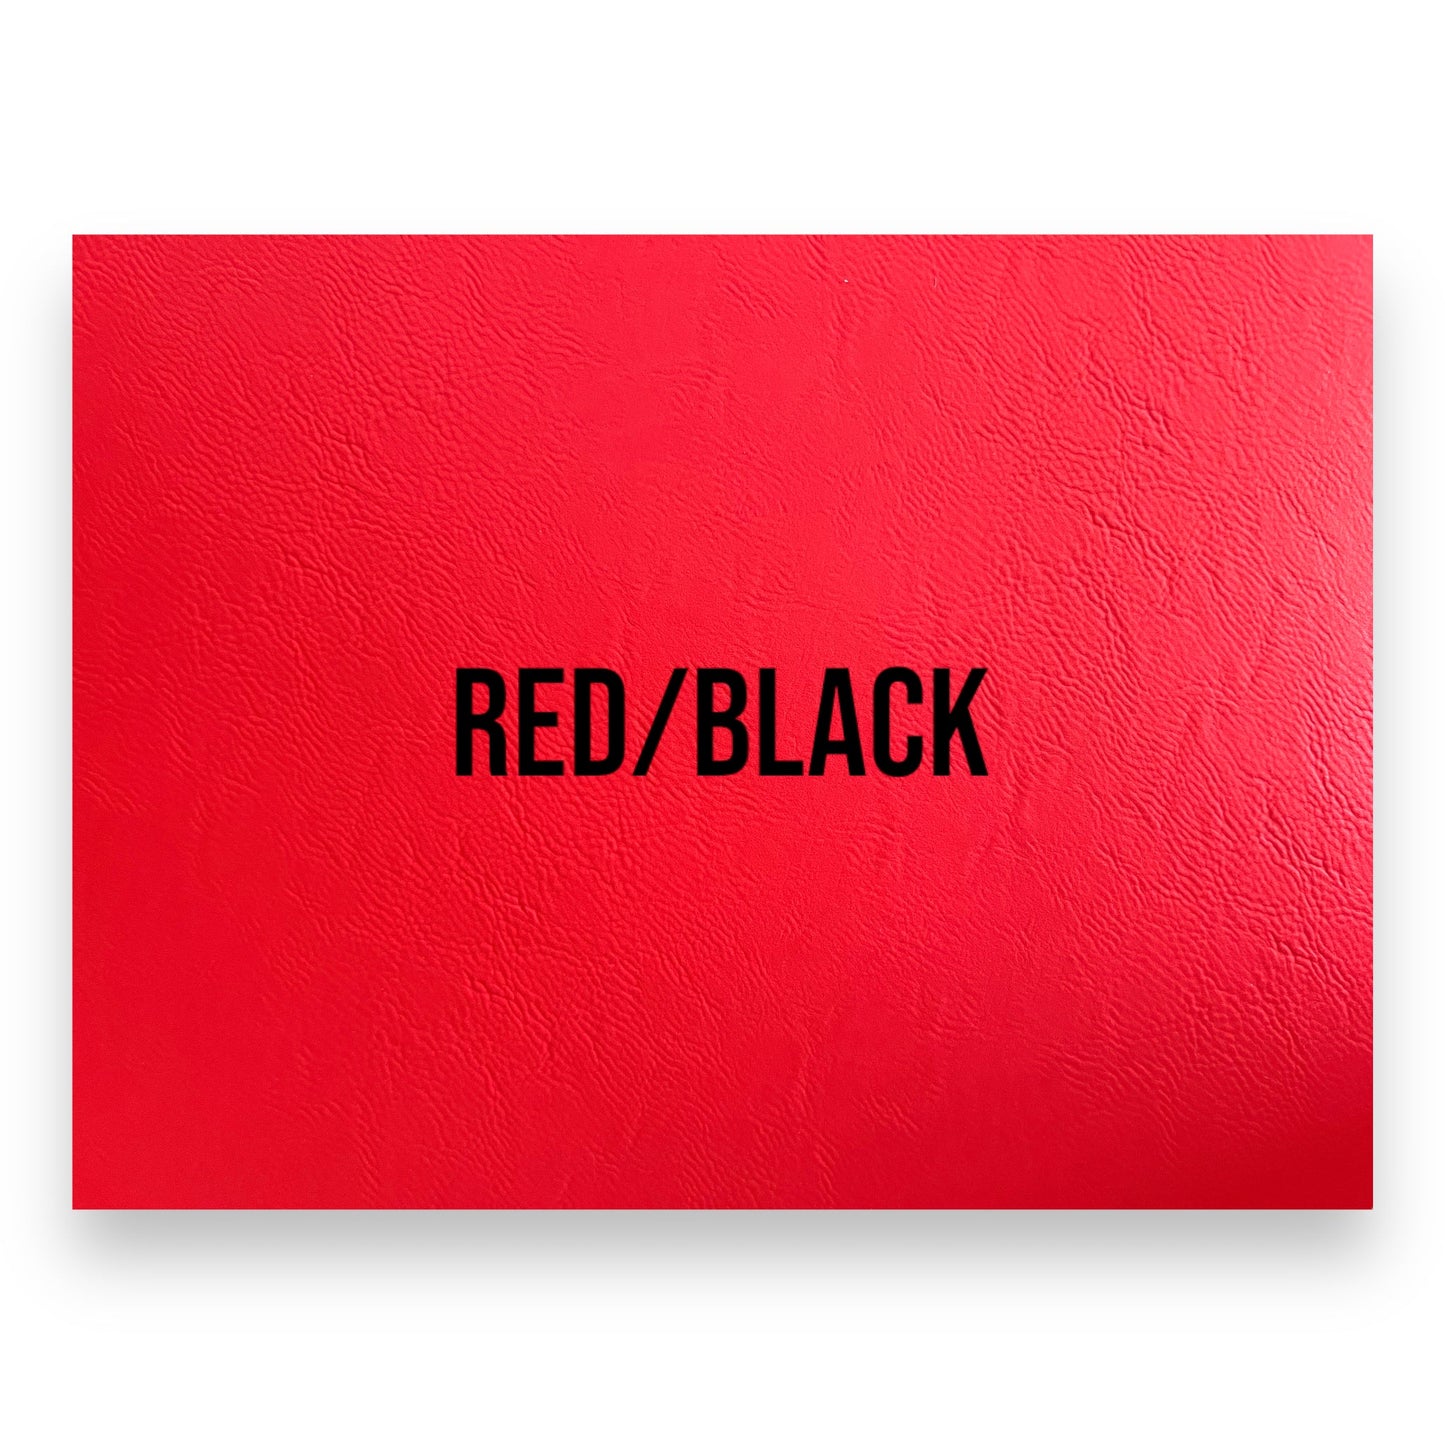 NO ADHESIVE RED/BLACK LEATHERETTE SHEET (12"x24")